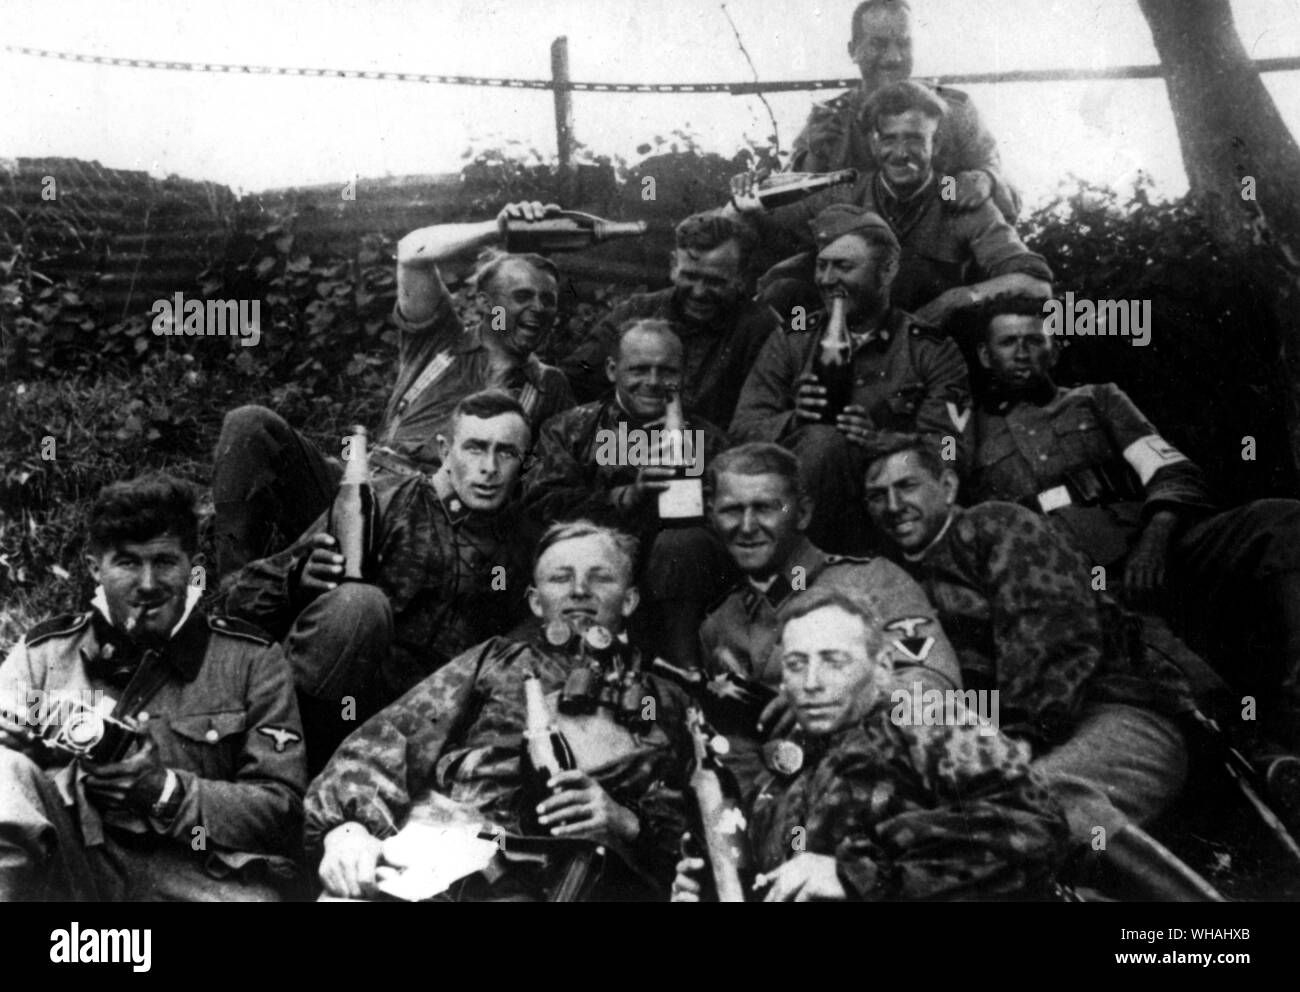 On the Russian battlefront; copy of snapshot found on body of Nazi soldier showing members of invading forces during early days of attack on USSR (in SS Album, boozy Germans waving bottles!) Stock Photo